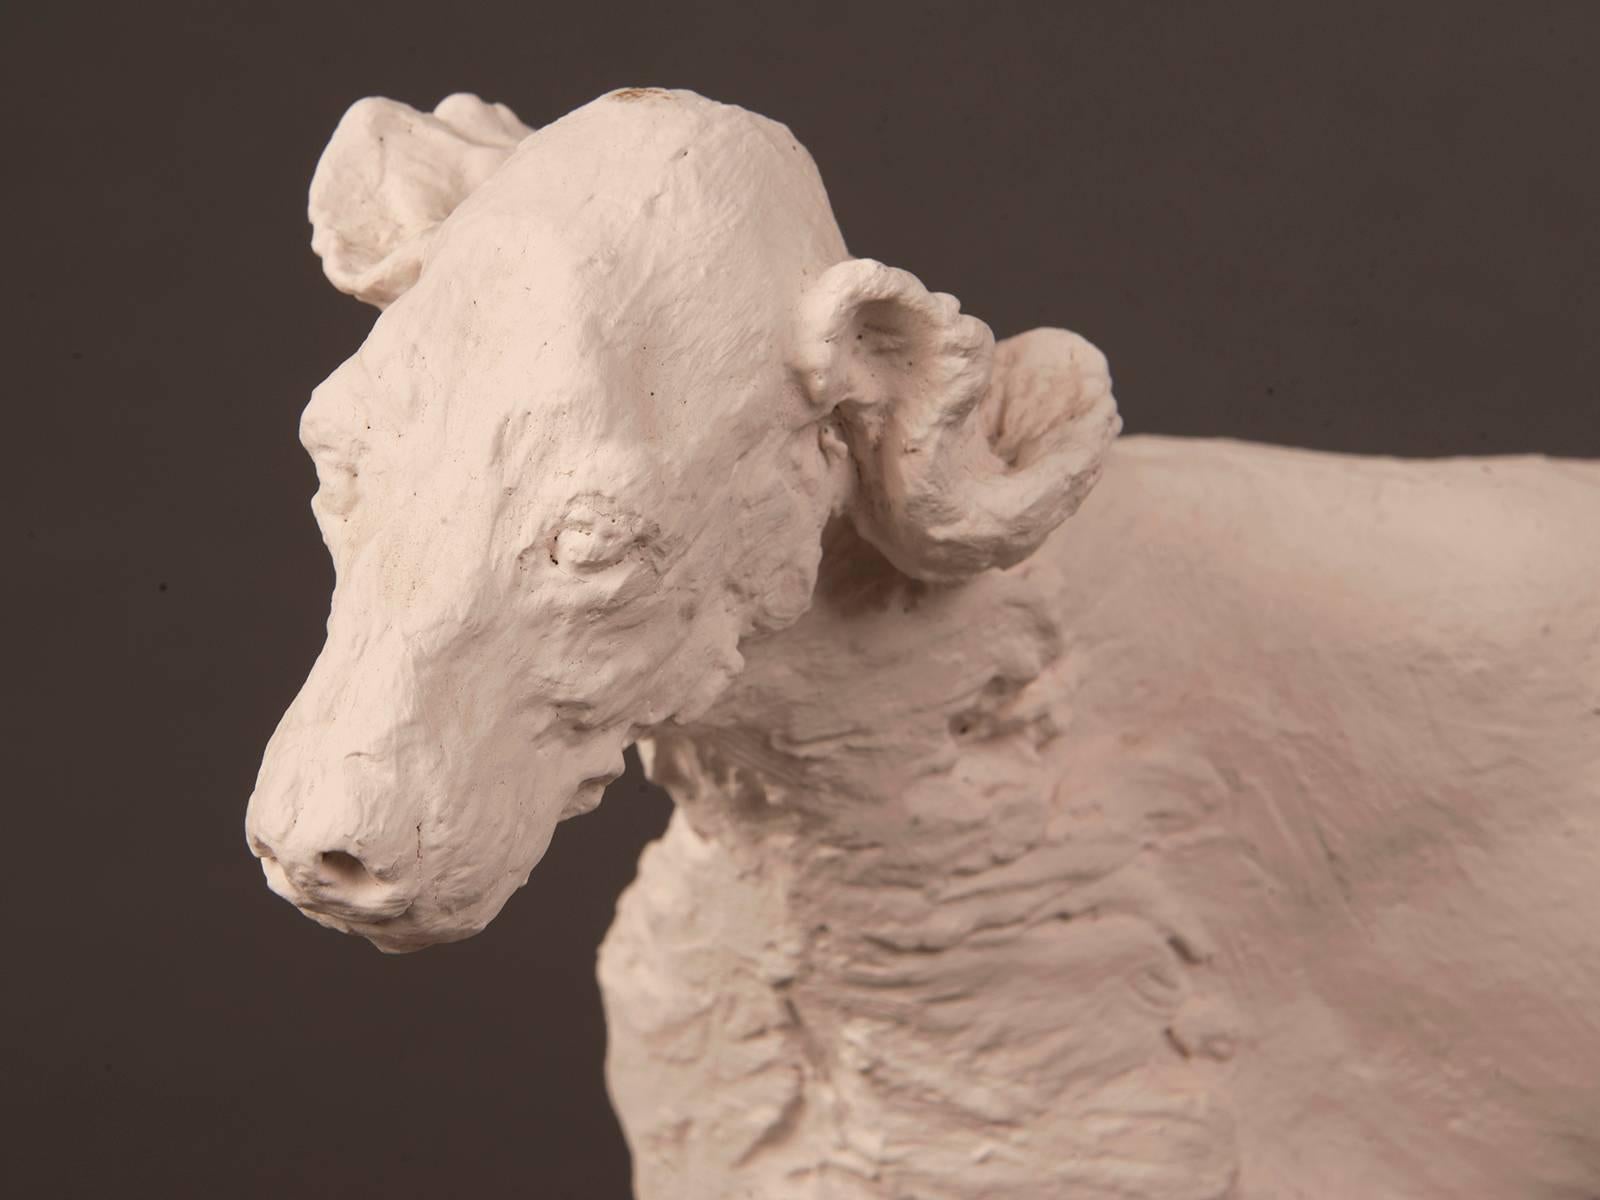 Receive our new selections direct from 1stdibs by email each week. Please click on “Follow Dealer” button below and see them first!

A vintage French large and detailed sculpture maquette of a hunting dog rendered in superb detail in plaster